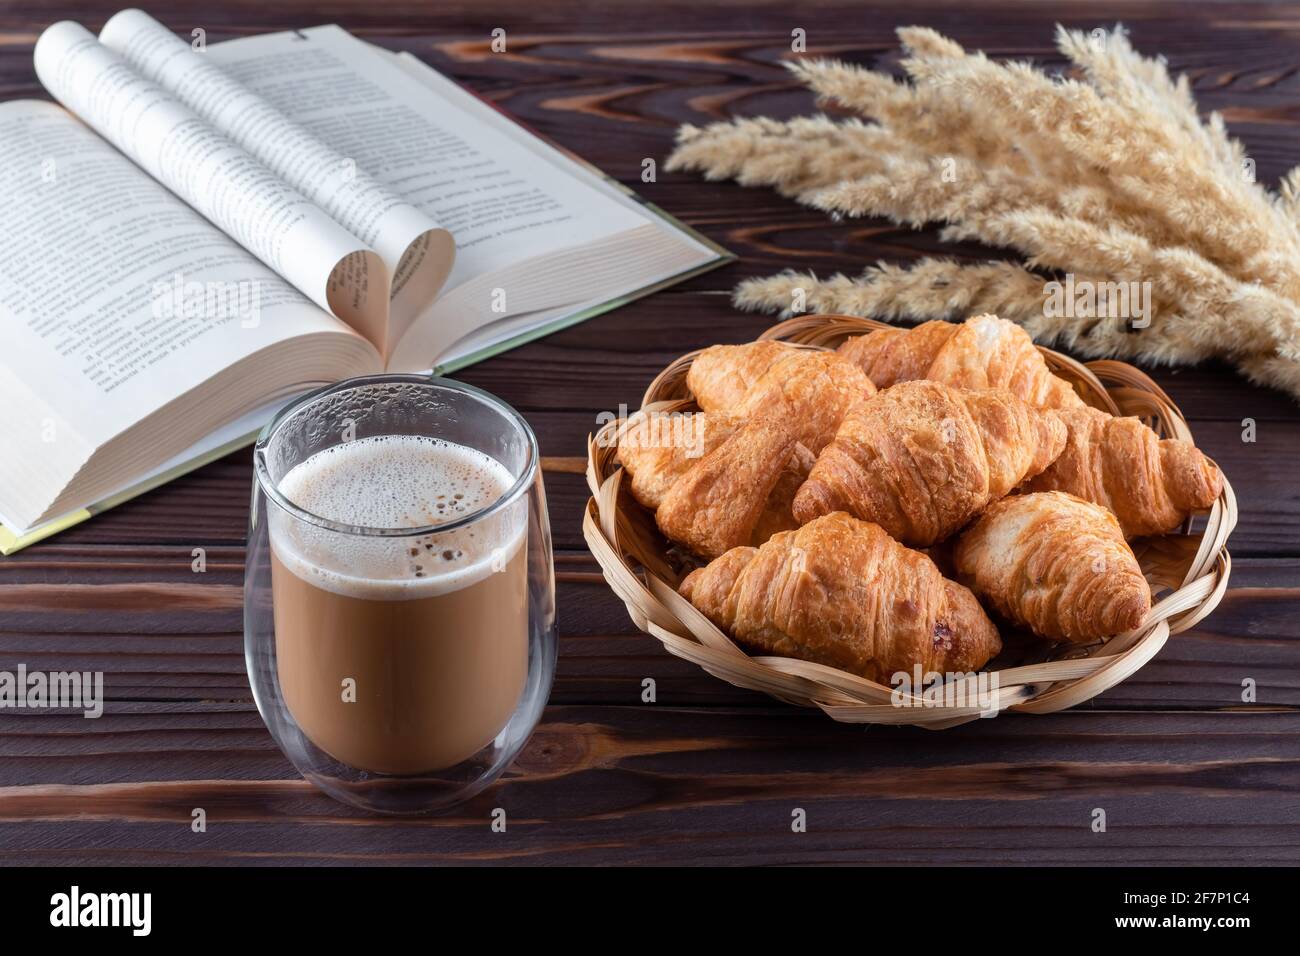 Croissants and a glass of coffee with milk on dark brown wooden table. Hot beverage and an open book on boards. French breakfast concept, coffee break Stock Photo